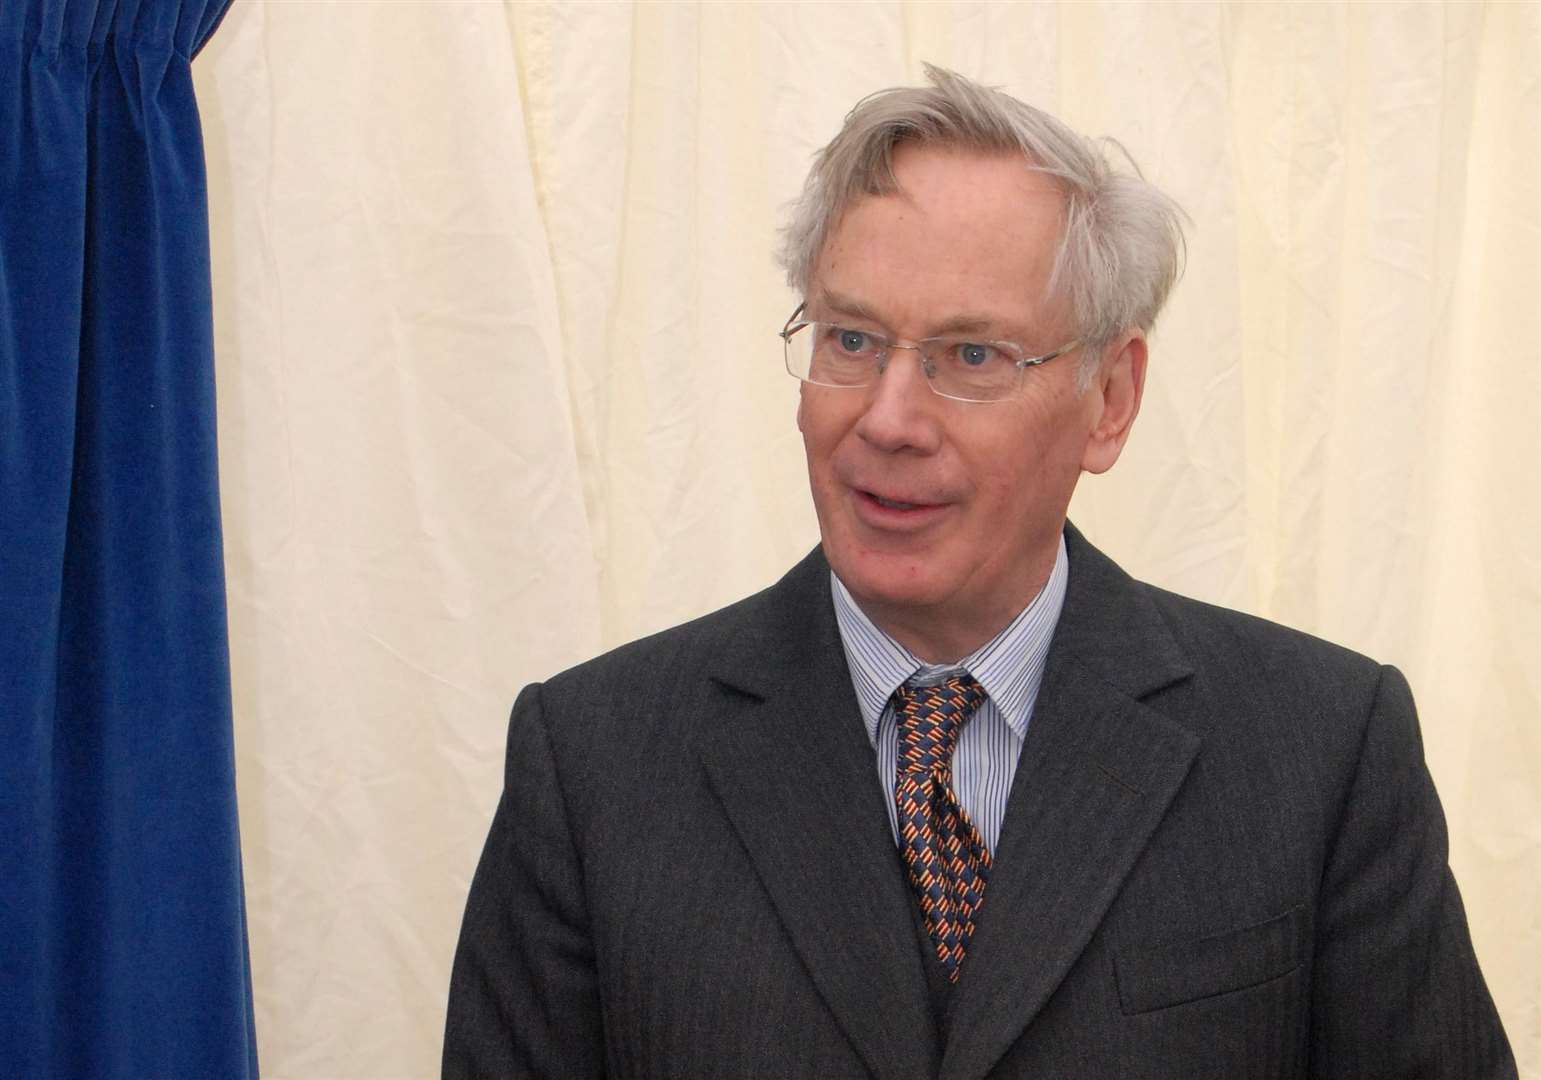 Duke of Gloucester presented the award to the architects